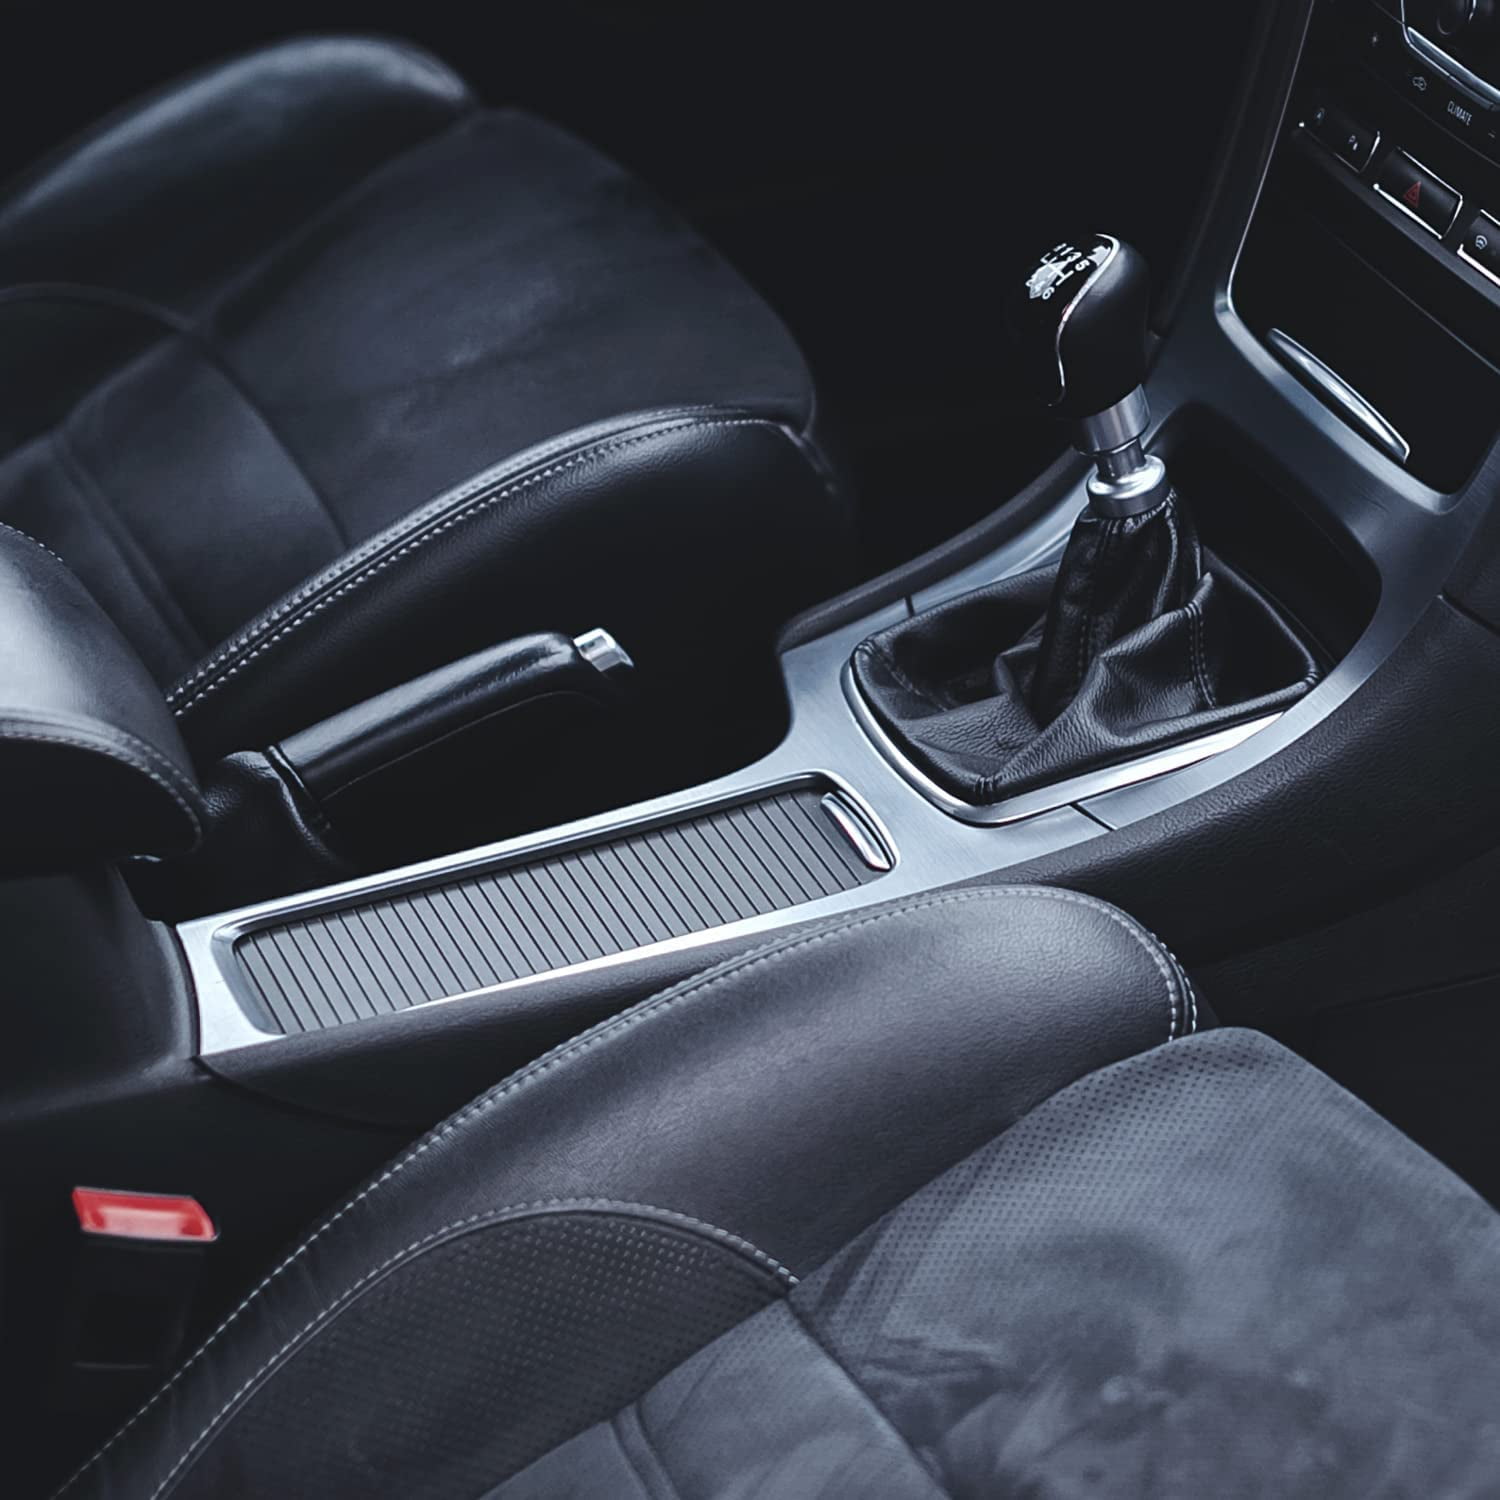 Mothers VLR for cleaning interior leather